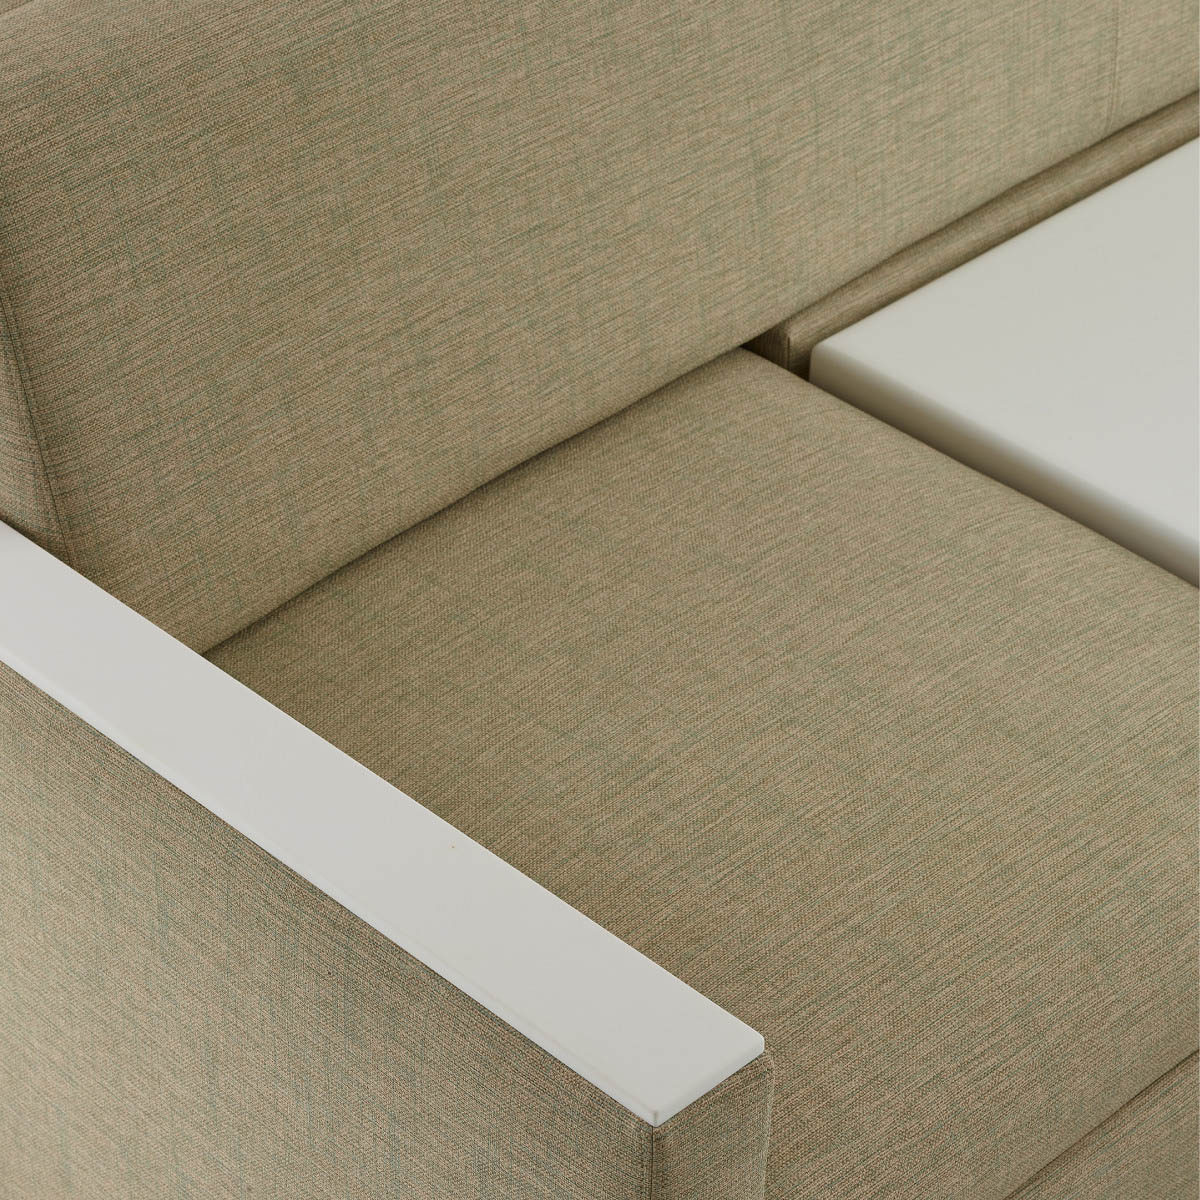 Detail of the clean out design on a Nemschoff Merge 2 Flop Sofa in a beige upholstery with a white center table and a natural maple base.